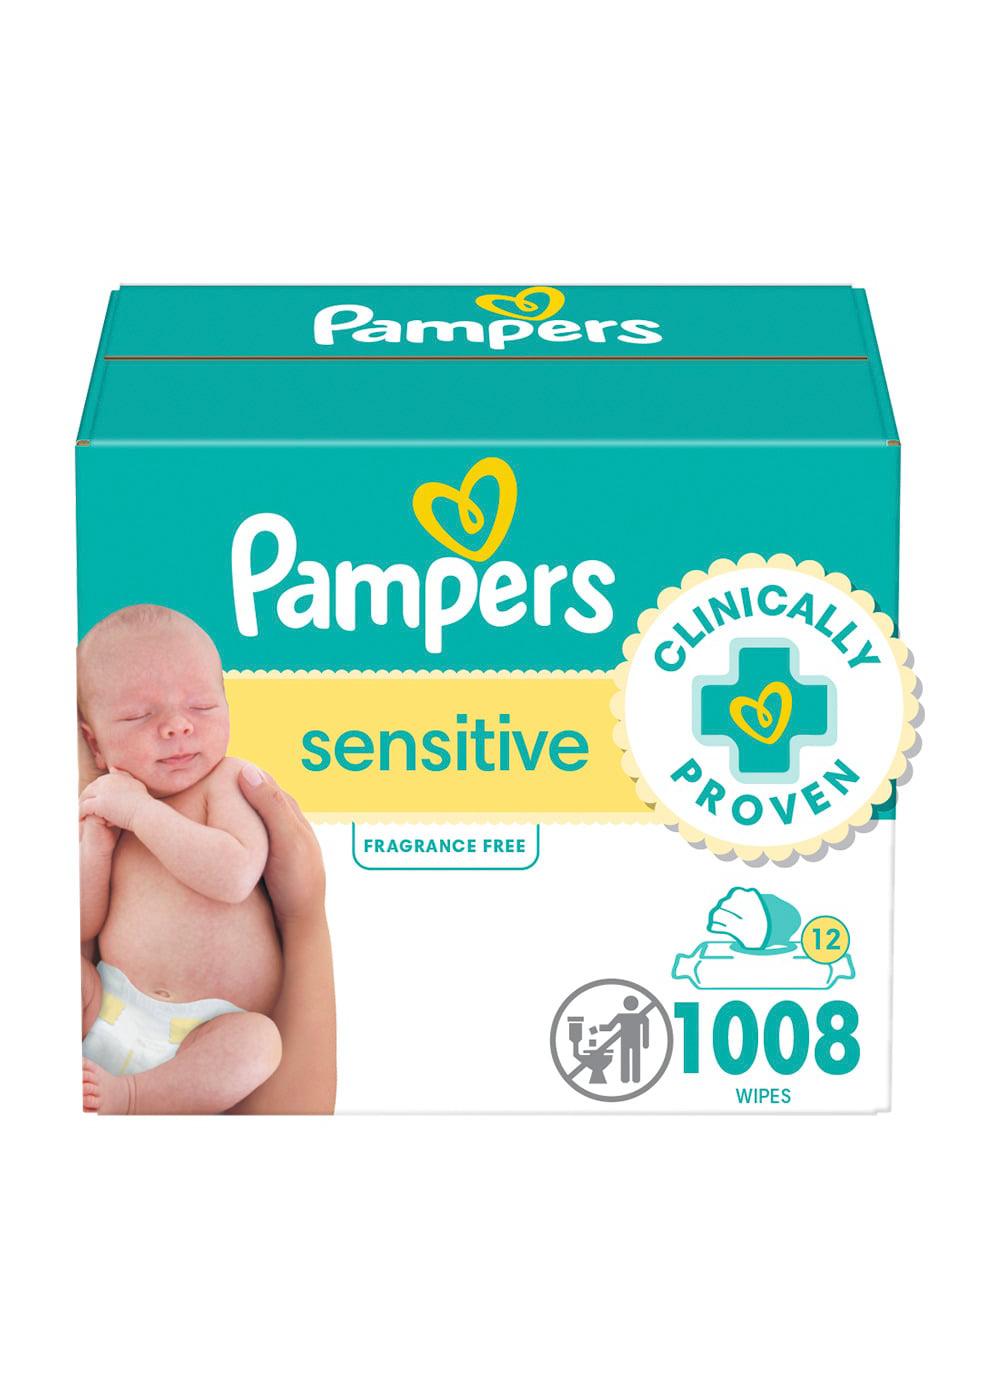 Pampers Sensitive Wipes 12 pk - Fragrance Free; image 1 of 10